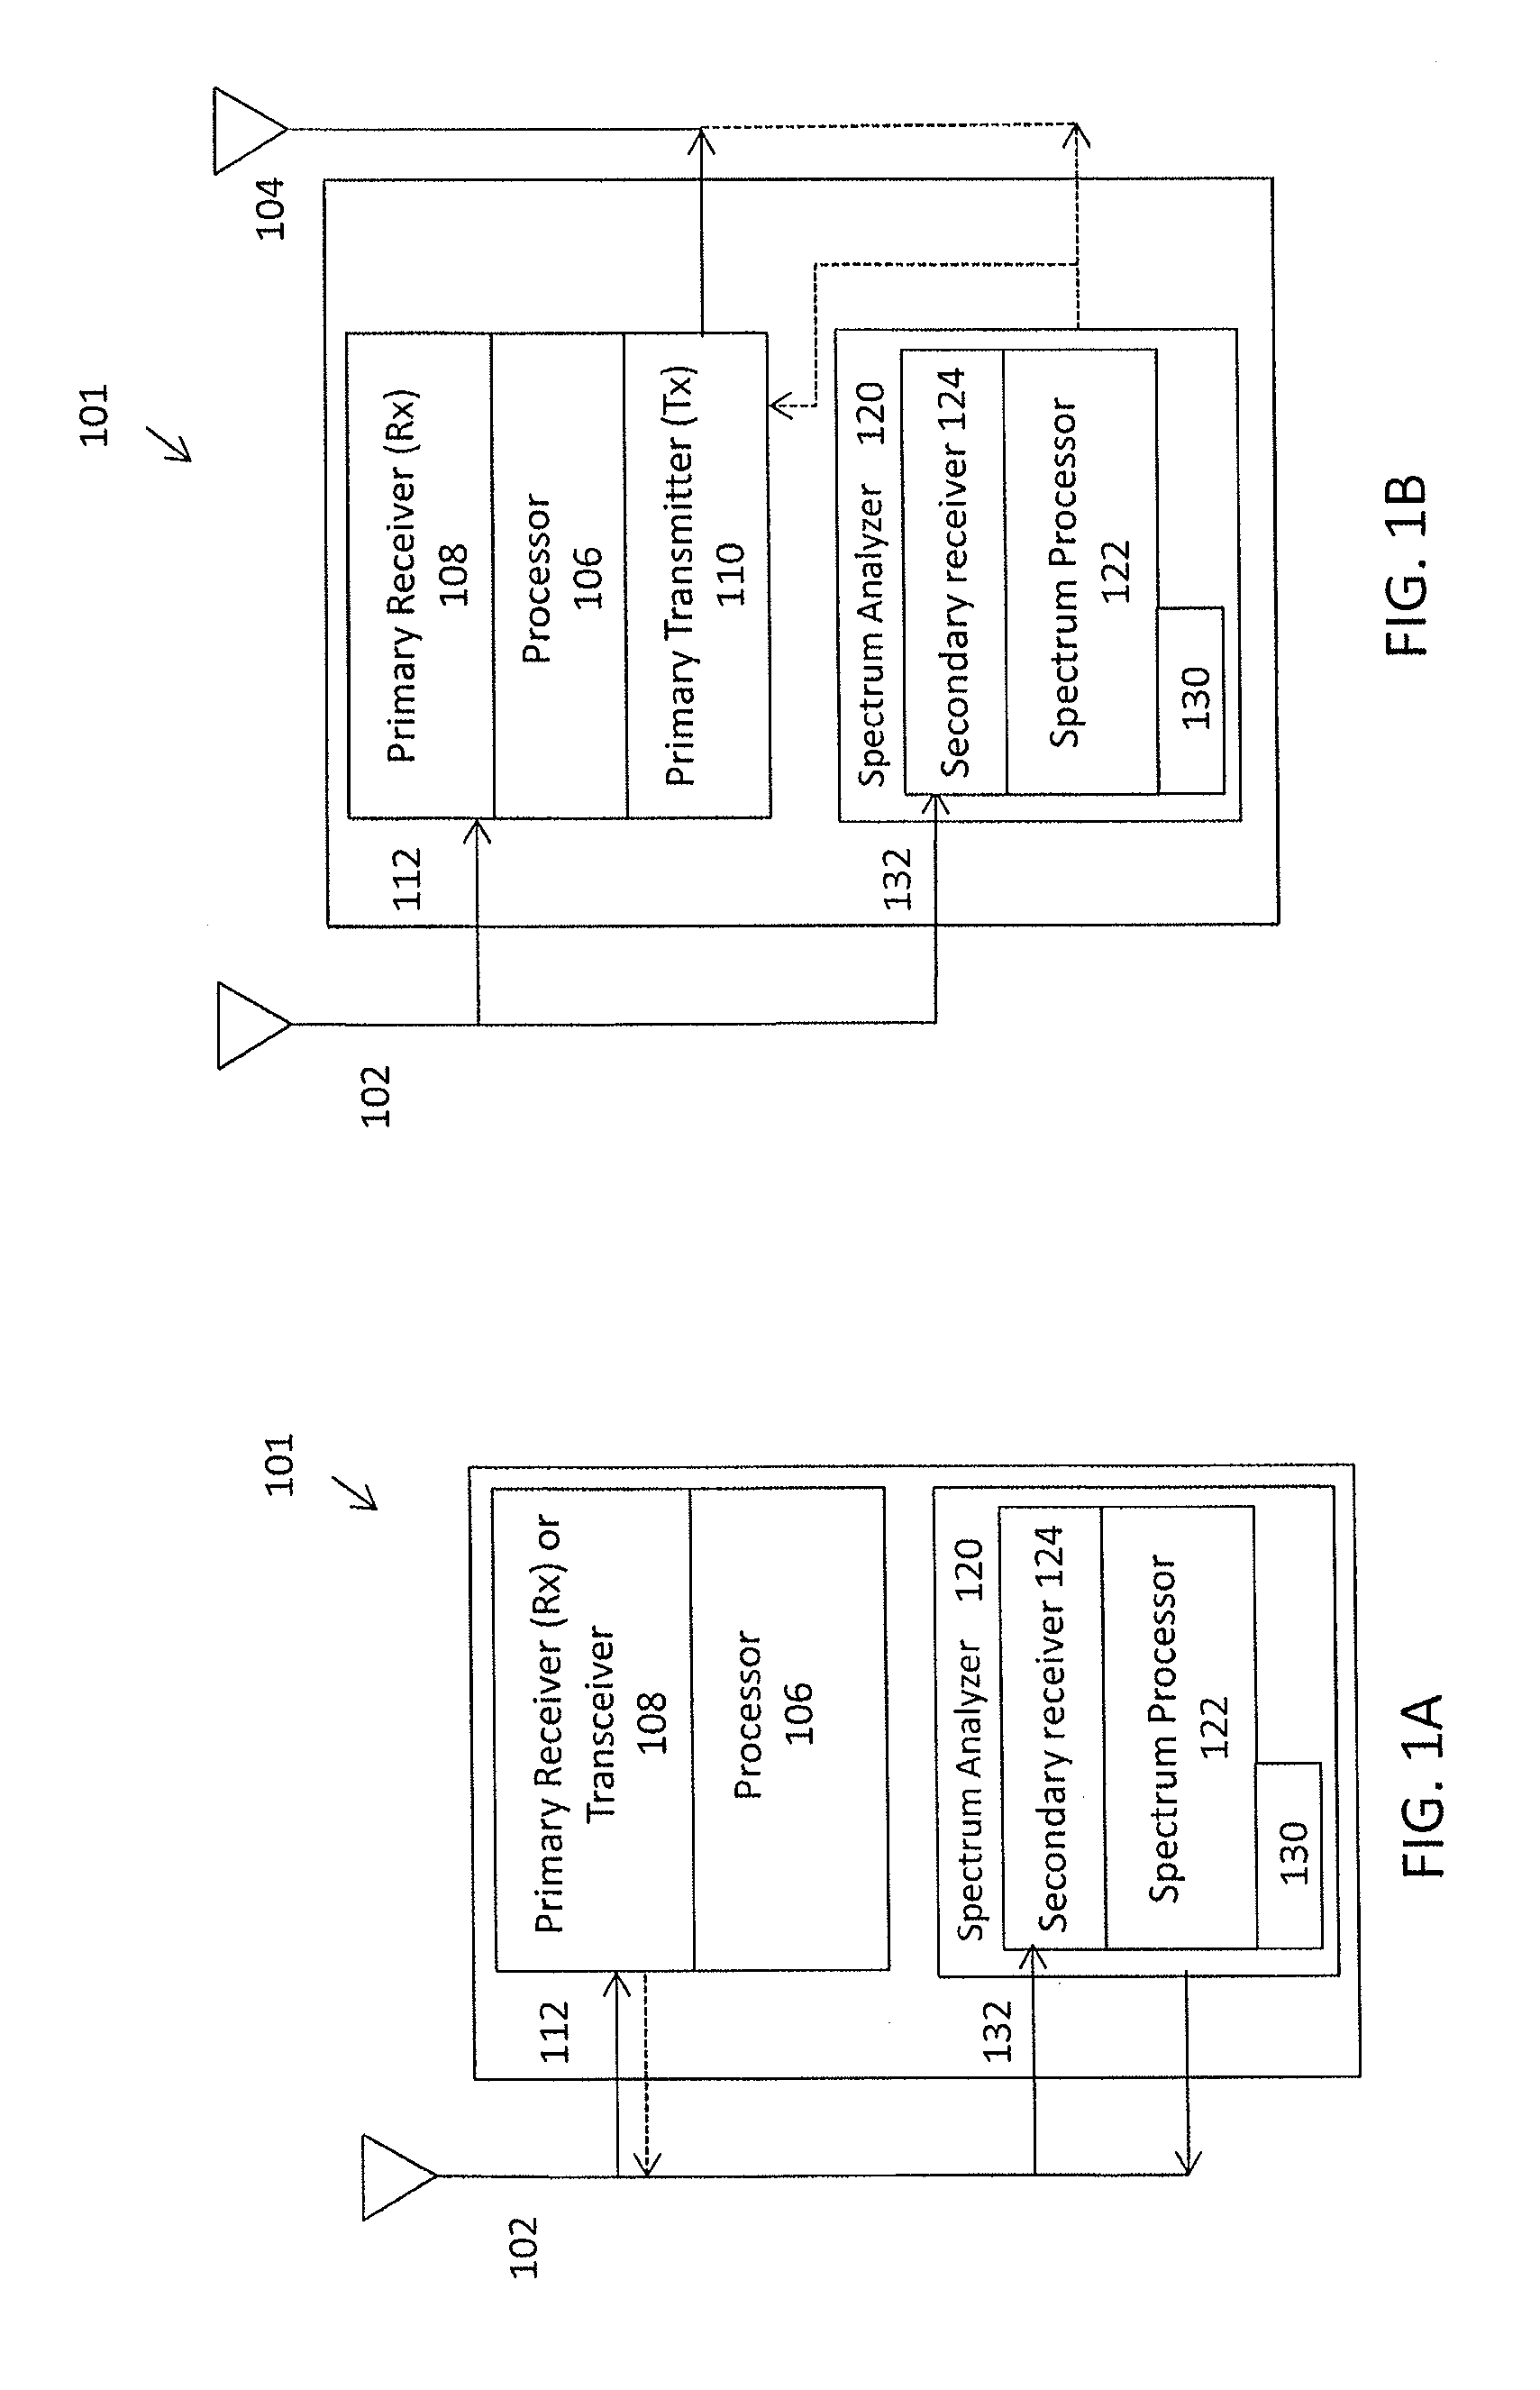 Methods and tools for assisting in the configuration of a wireless radio network